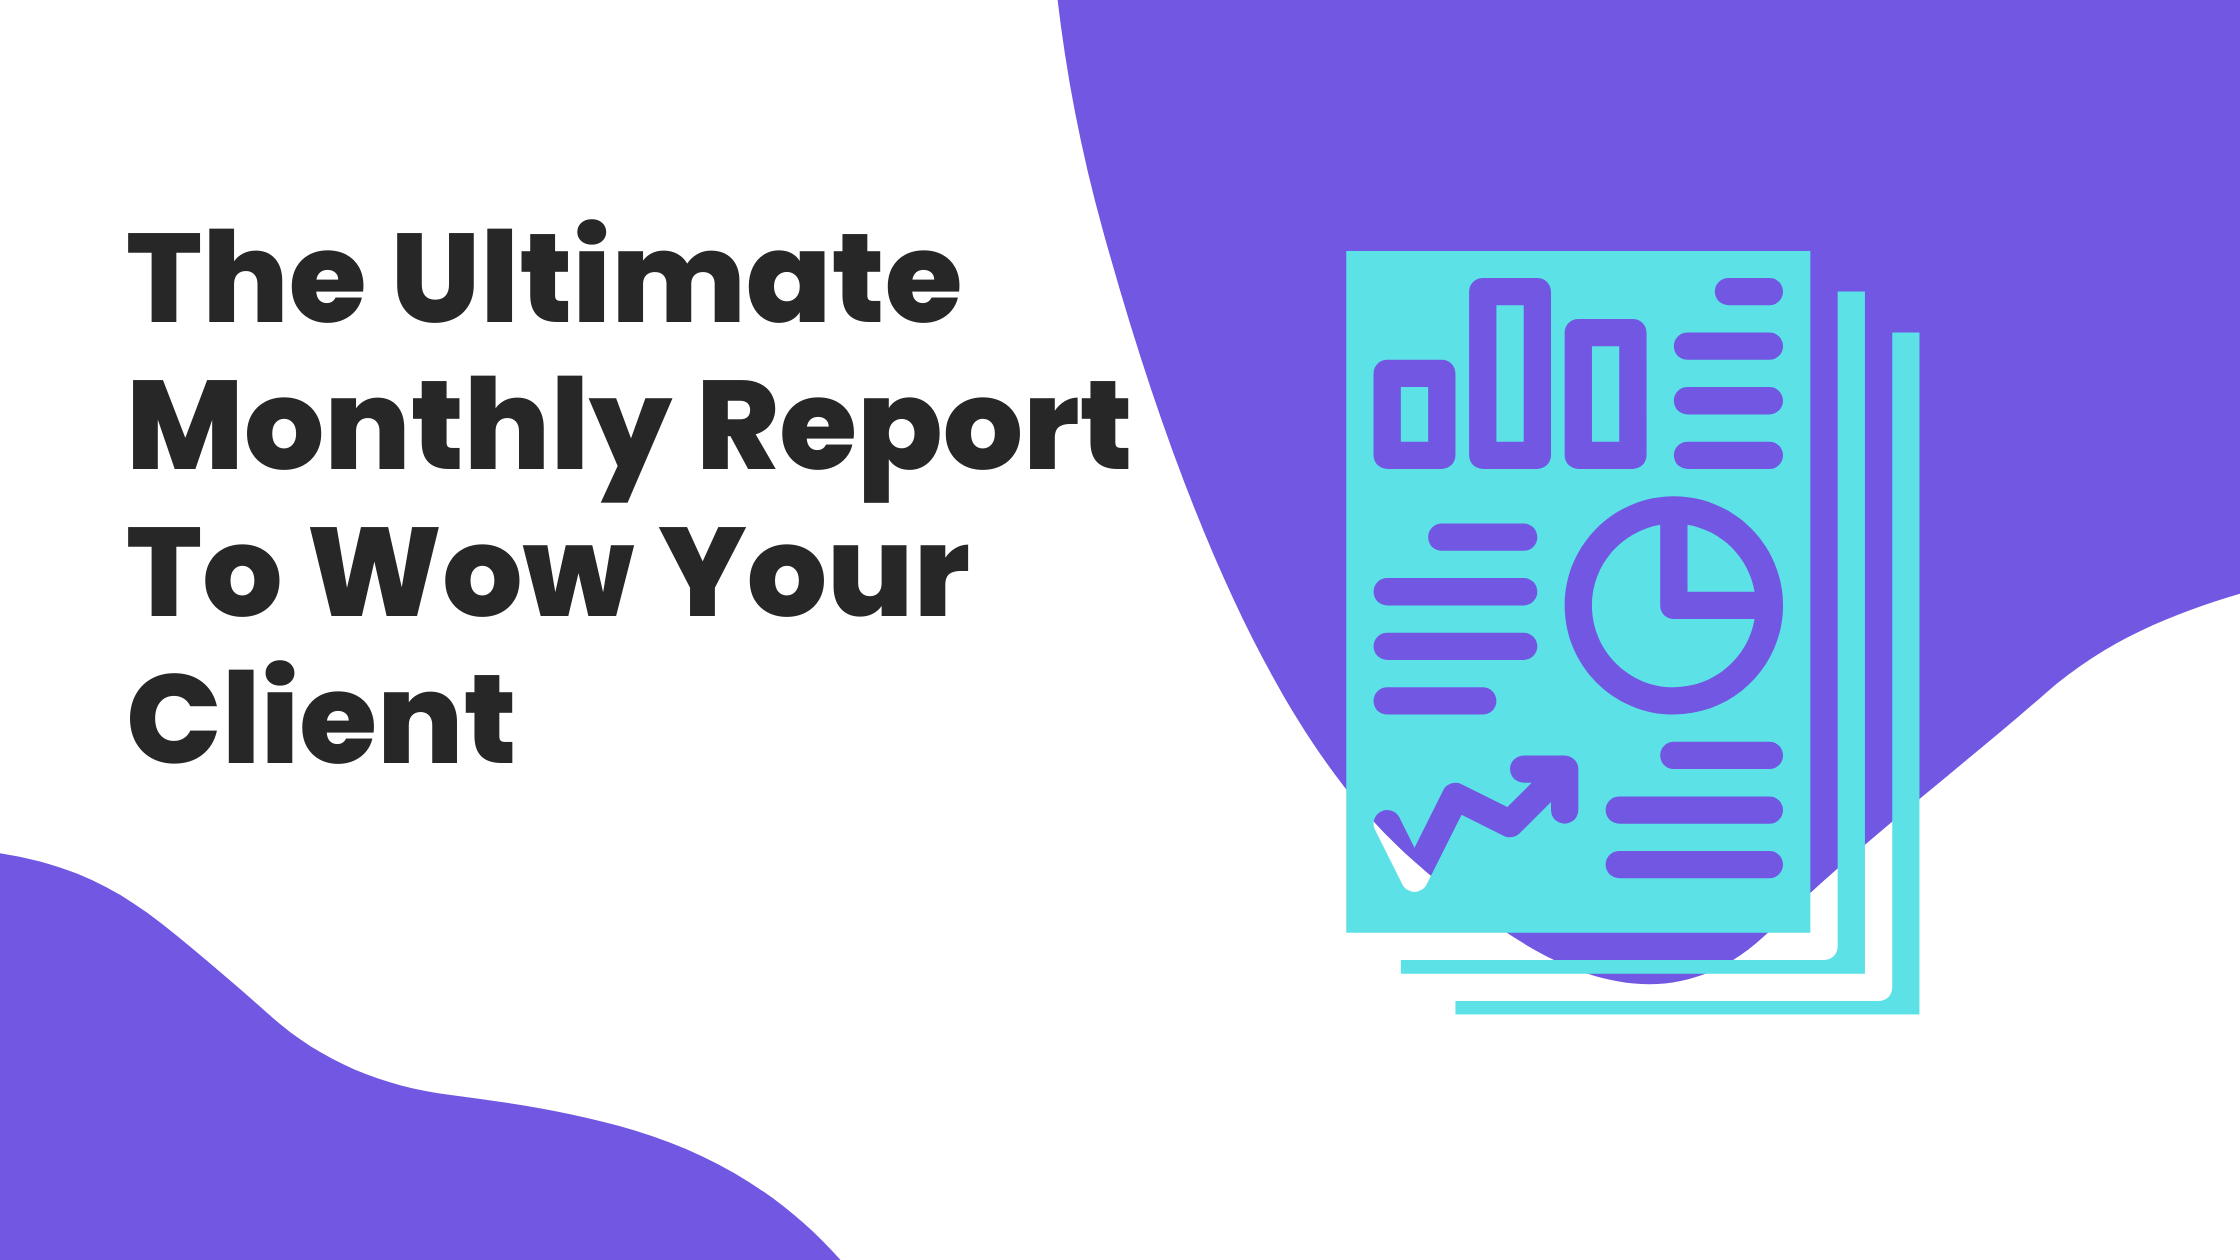 The Ultimate Monthly Report To Wow Your Client